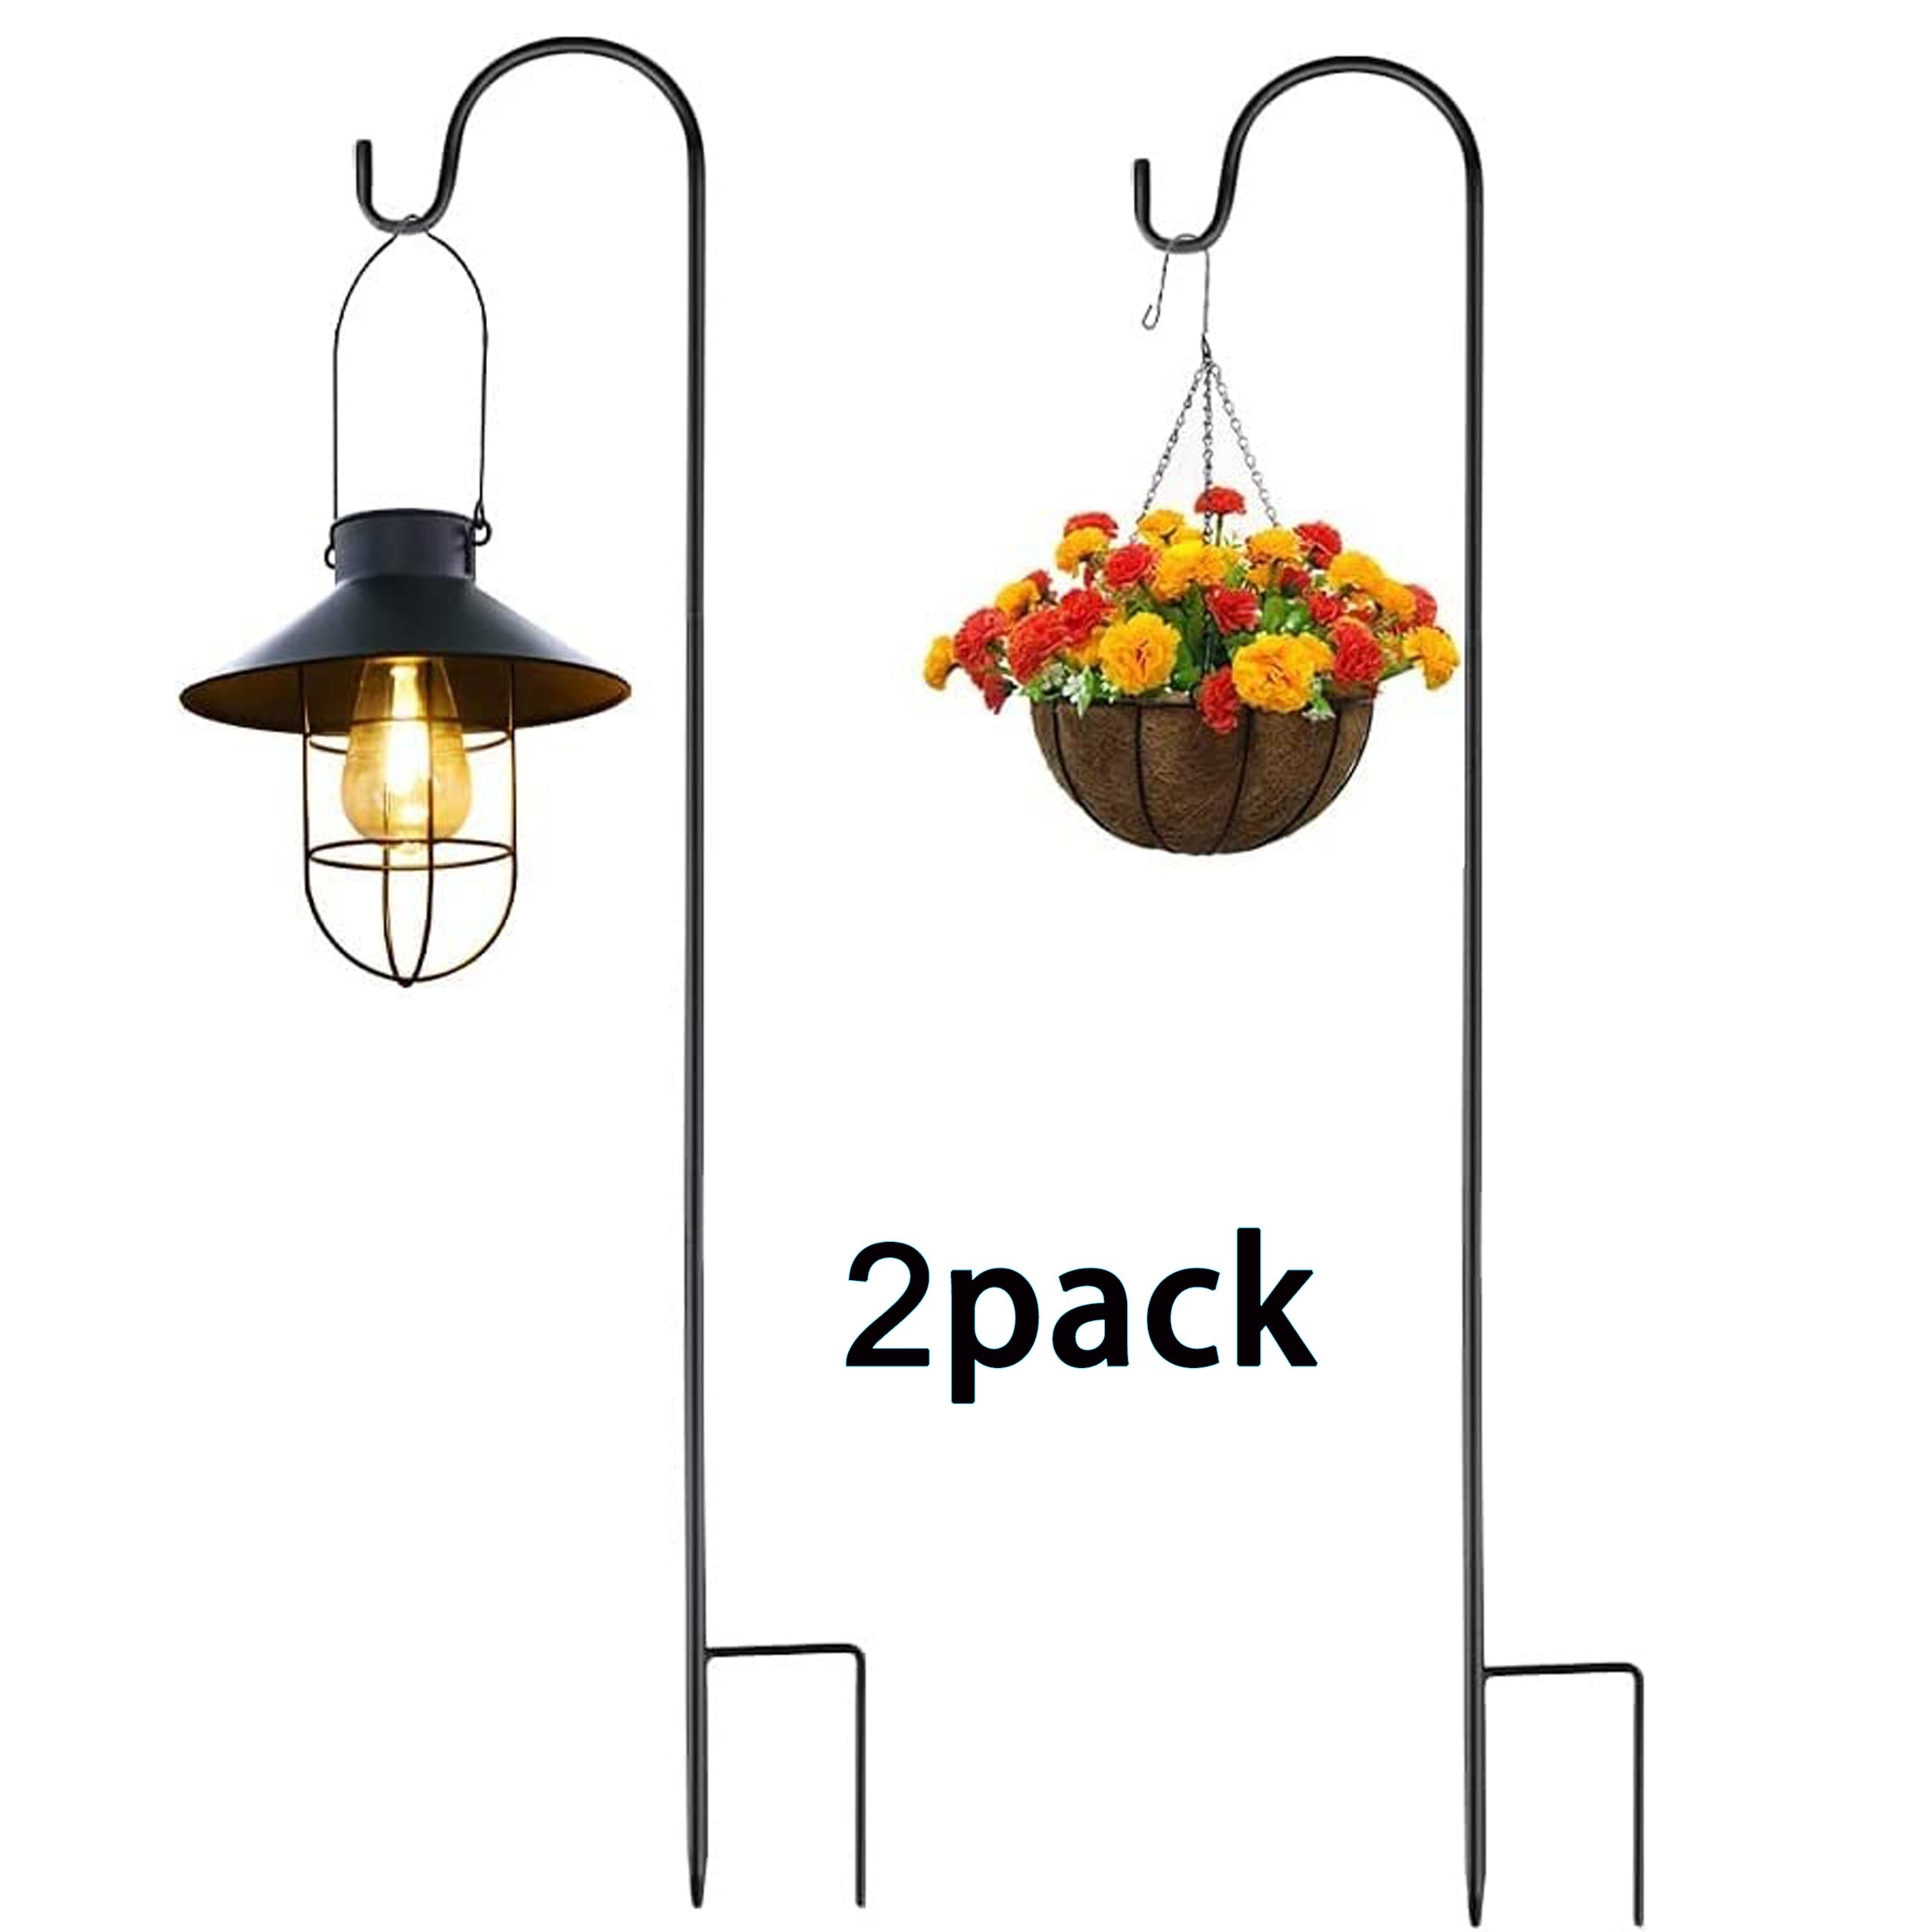 

2-pack 62 Inch Shepherd's Hooks - Contemporary Metal Garden Stakes For Outdoor Decor, Easy To Install Wall Mount Shepherd Hooks For Hanging Lanterns, Bird Feeders, Solar Lights, Plant Baskets